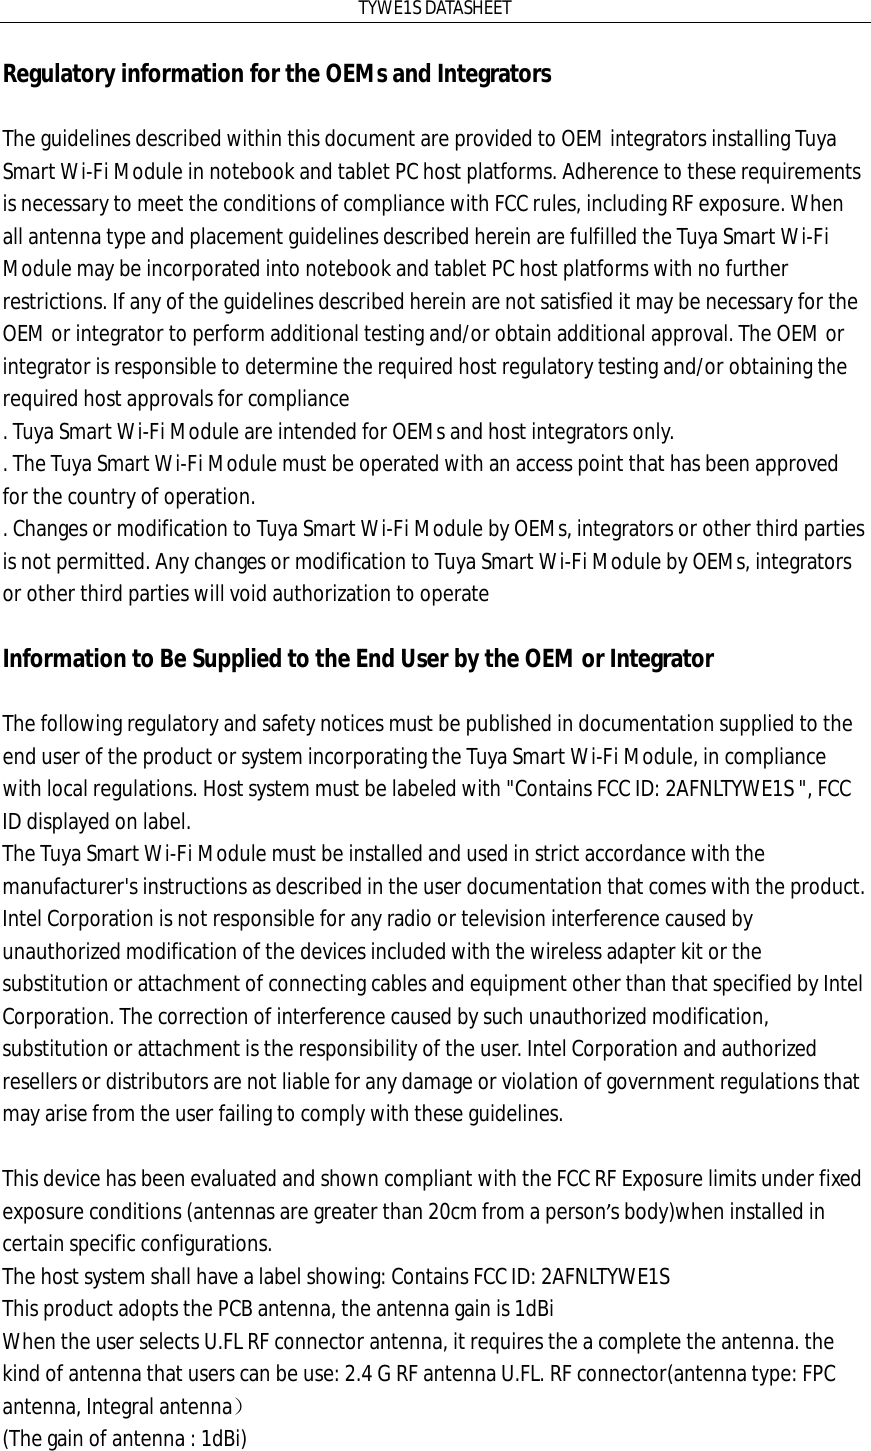 TYWE1S DATASHEET Regulatory information for the OEMs and Integrators  The guidelines described within this document are provided to OEM integrators installing Tuya Smart Wi-Fi Module in notebook and tablet PC host platforms. Adherence to these requirements is necessary to meet the conditions of compliance with FCC rules, including RF exposure. When all antenna type and placement guidelines described herein are fulfilled the Tuya Smart Wi-Fi Module may be incorporated into notebook and tablet PC host platforms with no further restrictions. If any of the guidelines described herein are not satisfied it may be necessary for the OEM or integrator to perform additional testing and/or obtain additional approval. The OEM or integrator is responsible to determine the required host regulatory testing and/or obtaining the required host approvals for compliance . Tuya Smart Wi-Fi Module are intended for OEMs and host integrators only. . The Tuya Smart Wi-Fi Module must be operated with an access point that has been approved for the country of operation. . Changes or modification to Tuya Smart Wi-Fi Module by OEMs, integrators or other third parties is not permitted. Any changes or modification to Tuya Smart Wi-Fi Module by OEMs, integrators or other third parties will void authorization to operate  Information to Be Supplied to the End User by the OEM or Integrator      The following regulatory and safety notices must be published in documentation supplied to the end user of the product or system incorporating the Tuya Smart Wi-Fi Module, in compliance with local regulations. Host system must be labeled with &quot;Contains FCC ID: 2AFNLTYWE1S &quot;, FCC ID displayed on label.  The Tuya Smart Wi-Fi Module must be installed and used in strict accordance with the manufacturer&apos;s instructions as described in the user documentation that comes with the product. Intel Corporation is not responsible for any radio or television interference caused by unauthorized modification of the devices included with the wireless adapter kit or the substitution or attachment of connecting cables and equipment other than that specified by Intel Corporation. The correction of interference caused by such unauthorized modification, substitution or attachment is the responsibility of the user. Intel Corporation and authorized resellers or distributors are not liable for any damage or violation of government regulations that may arise from the user failing to comply with these guidelines.    This device has been evaluated and shown compliant with the FCC RF Exposure limits under fixed  exposure conditions (antennas are greater than 20cm from a person’s body)when installed in certain specific configurations.  The host system shall have a label showing: Contains FCC ID: 2AFNLTYWE1S This product adopts the PCB antenna, the antenna gain is 1dBi When the user selects U.FL RF connector antenna, it requires the a complete the antenna. the kind of antenna that users can be use: 2.4 G RF antenna U.FL. RF connector(antenna type: FPC antenna, Integral antenna） (The gain of antenna : 1dBi)  